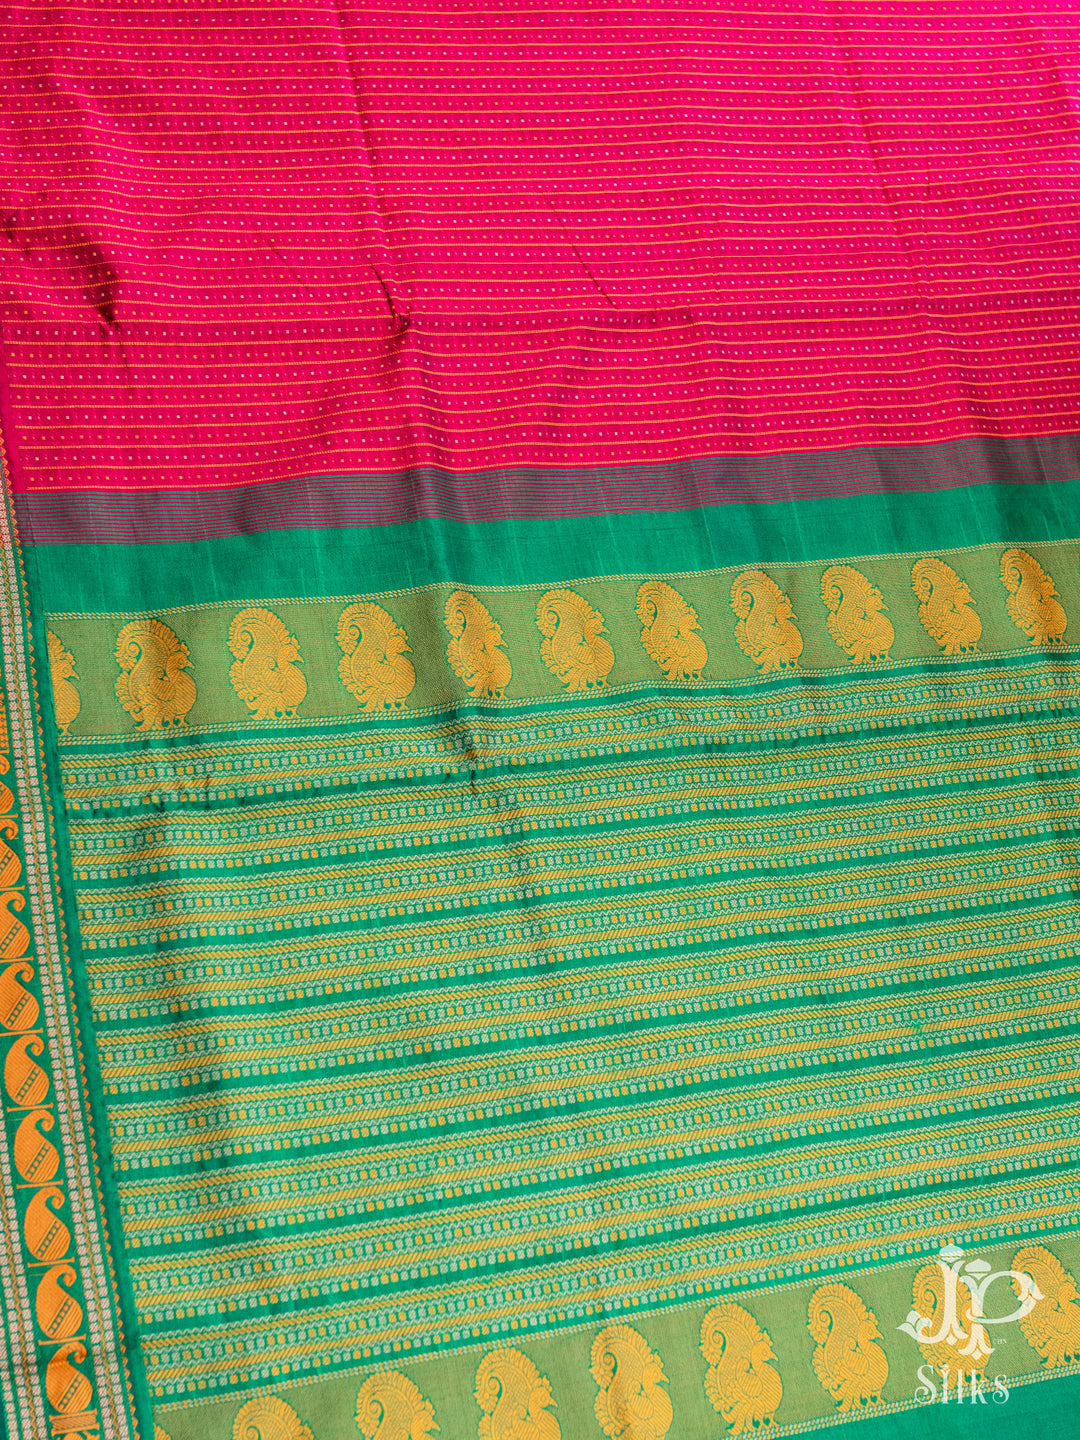 Rani Pink and Leaf Green Poly Cotton Saree - D1163 - View 2